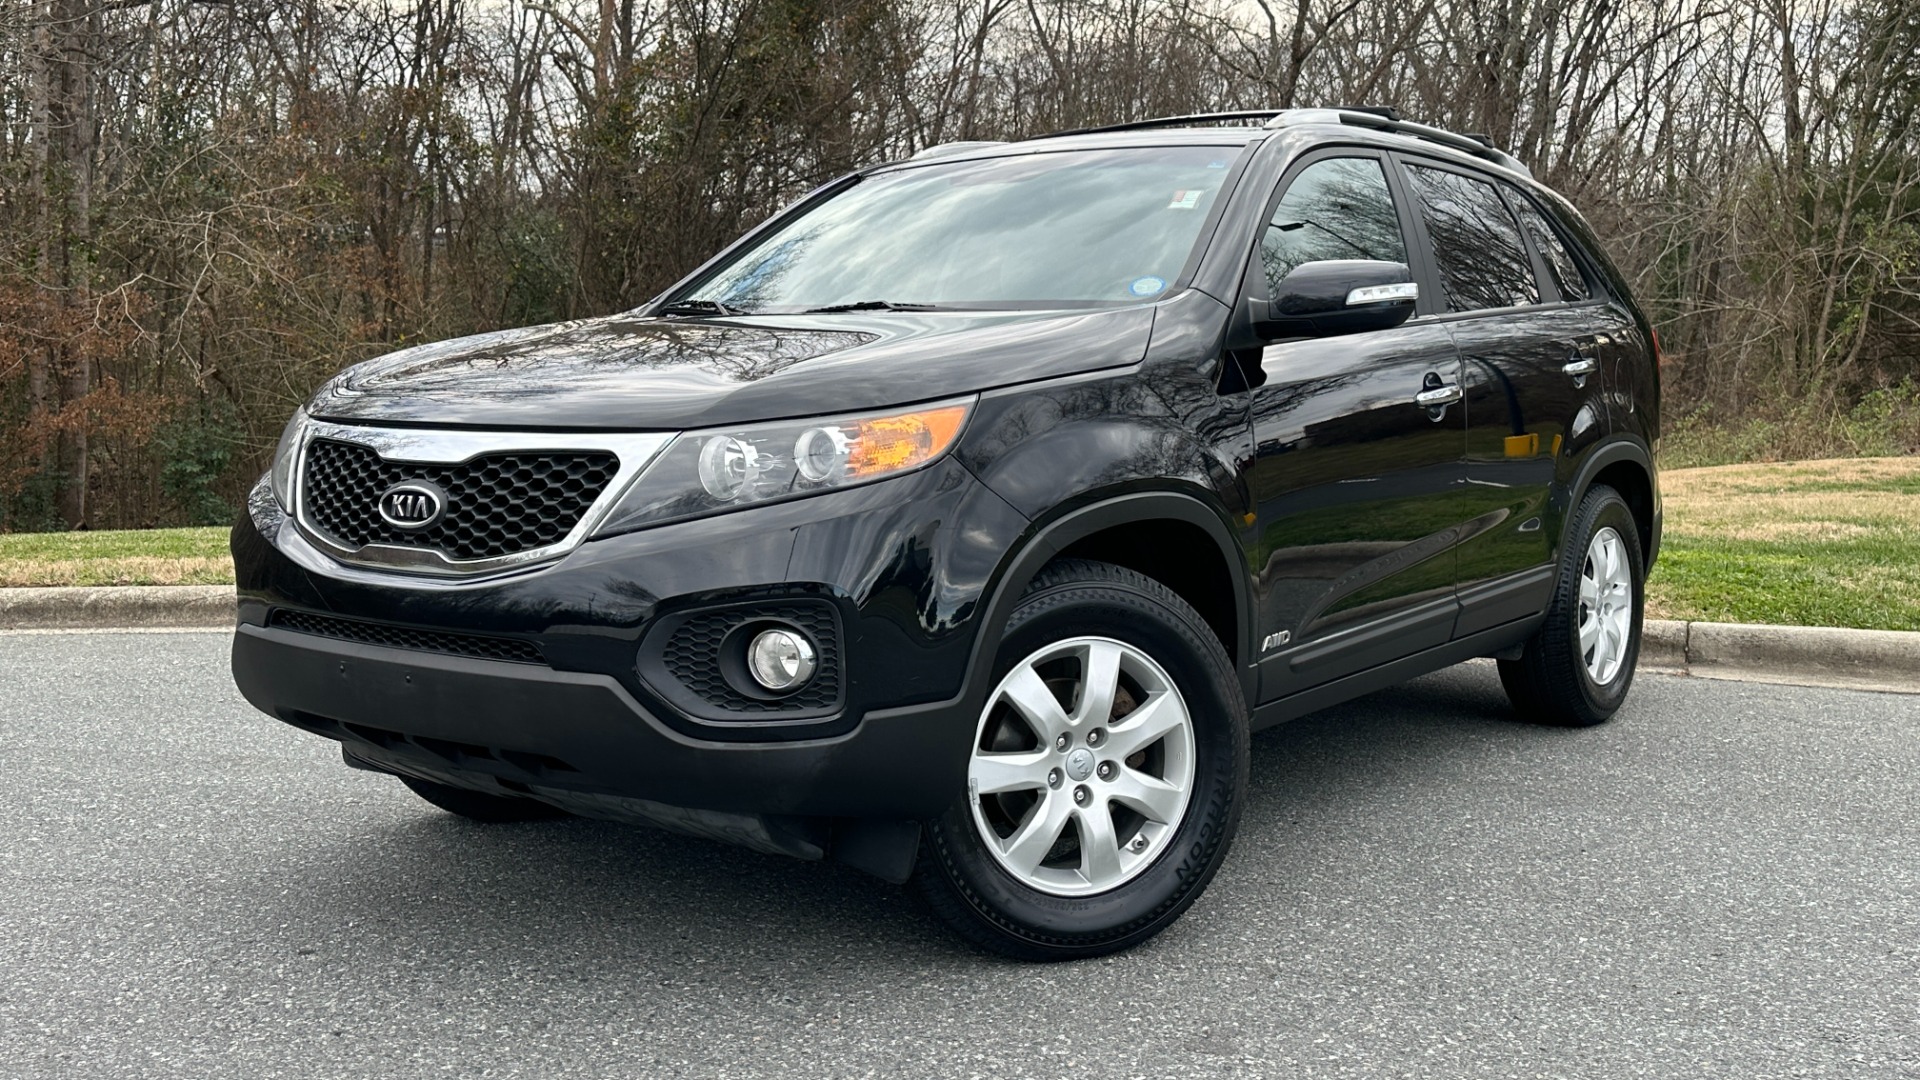 Used 2013 Kia Sorento LX / CONVENIENCE / AWD / 4CYL / CLOTH INTERIOR / ROOF RACK for sale Sold at Formula Imports in Charlotte NC 28227 1